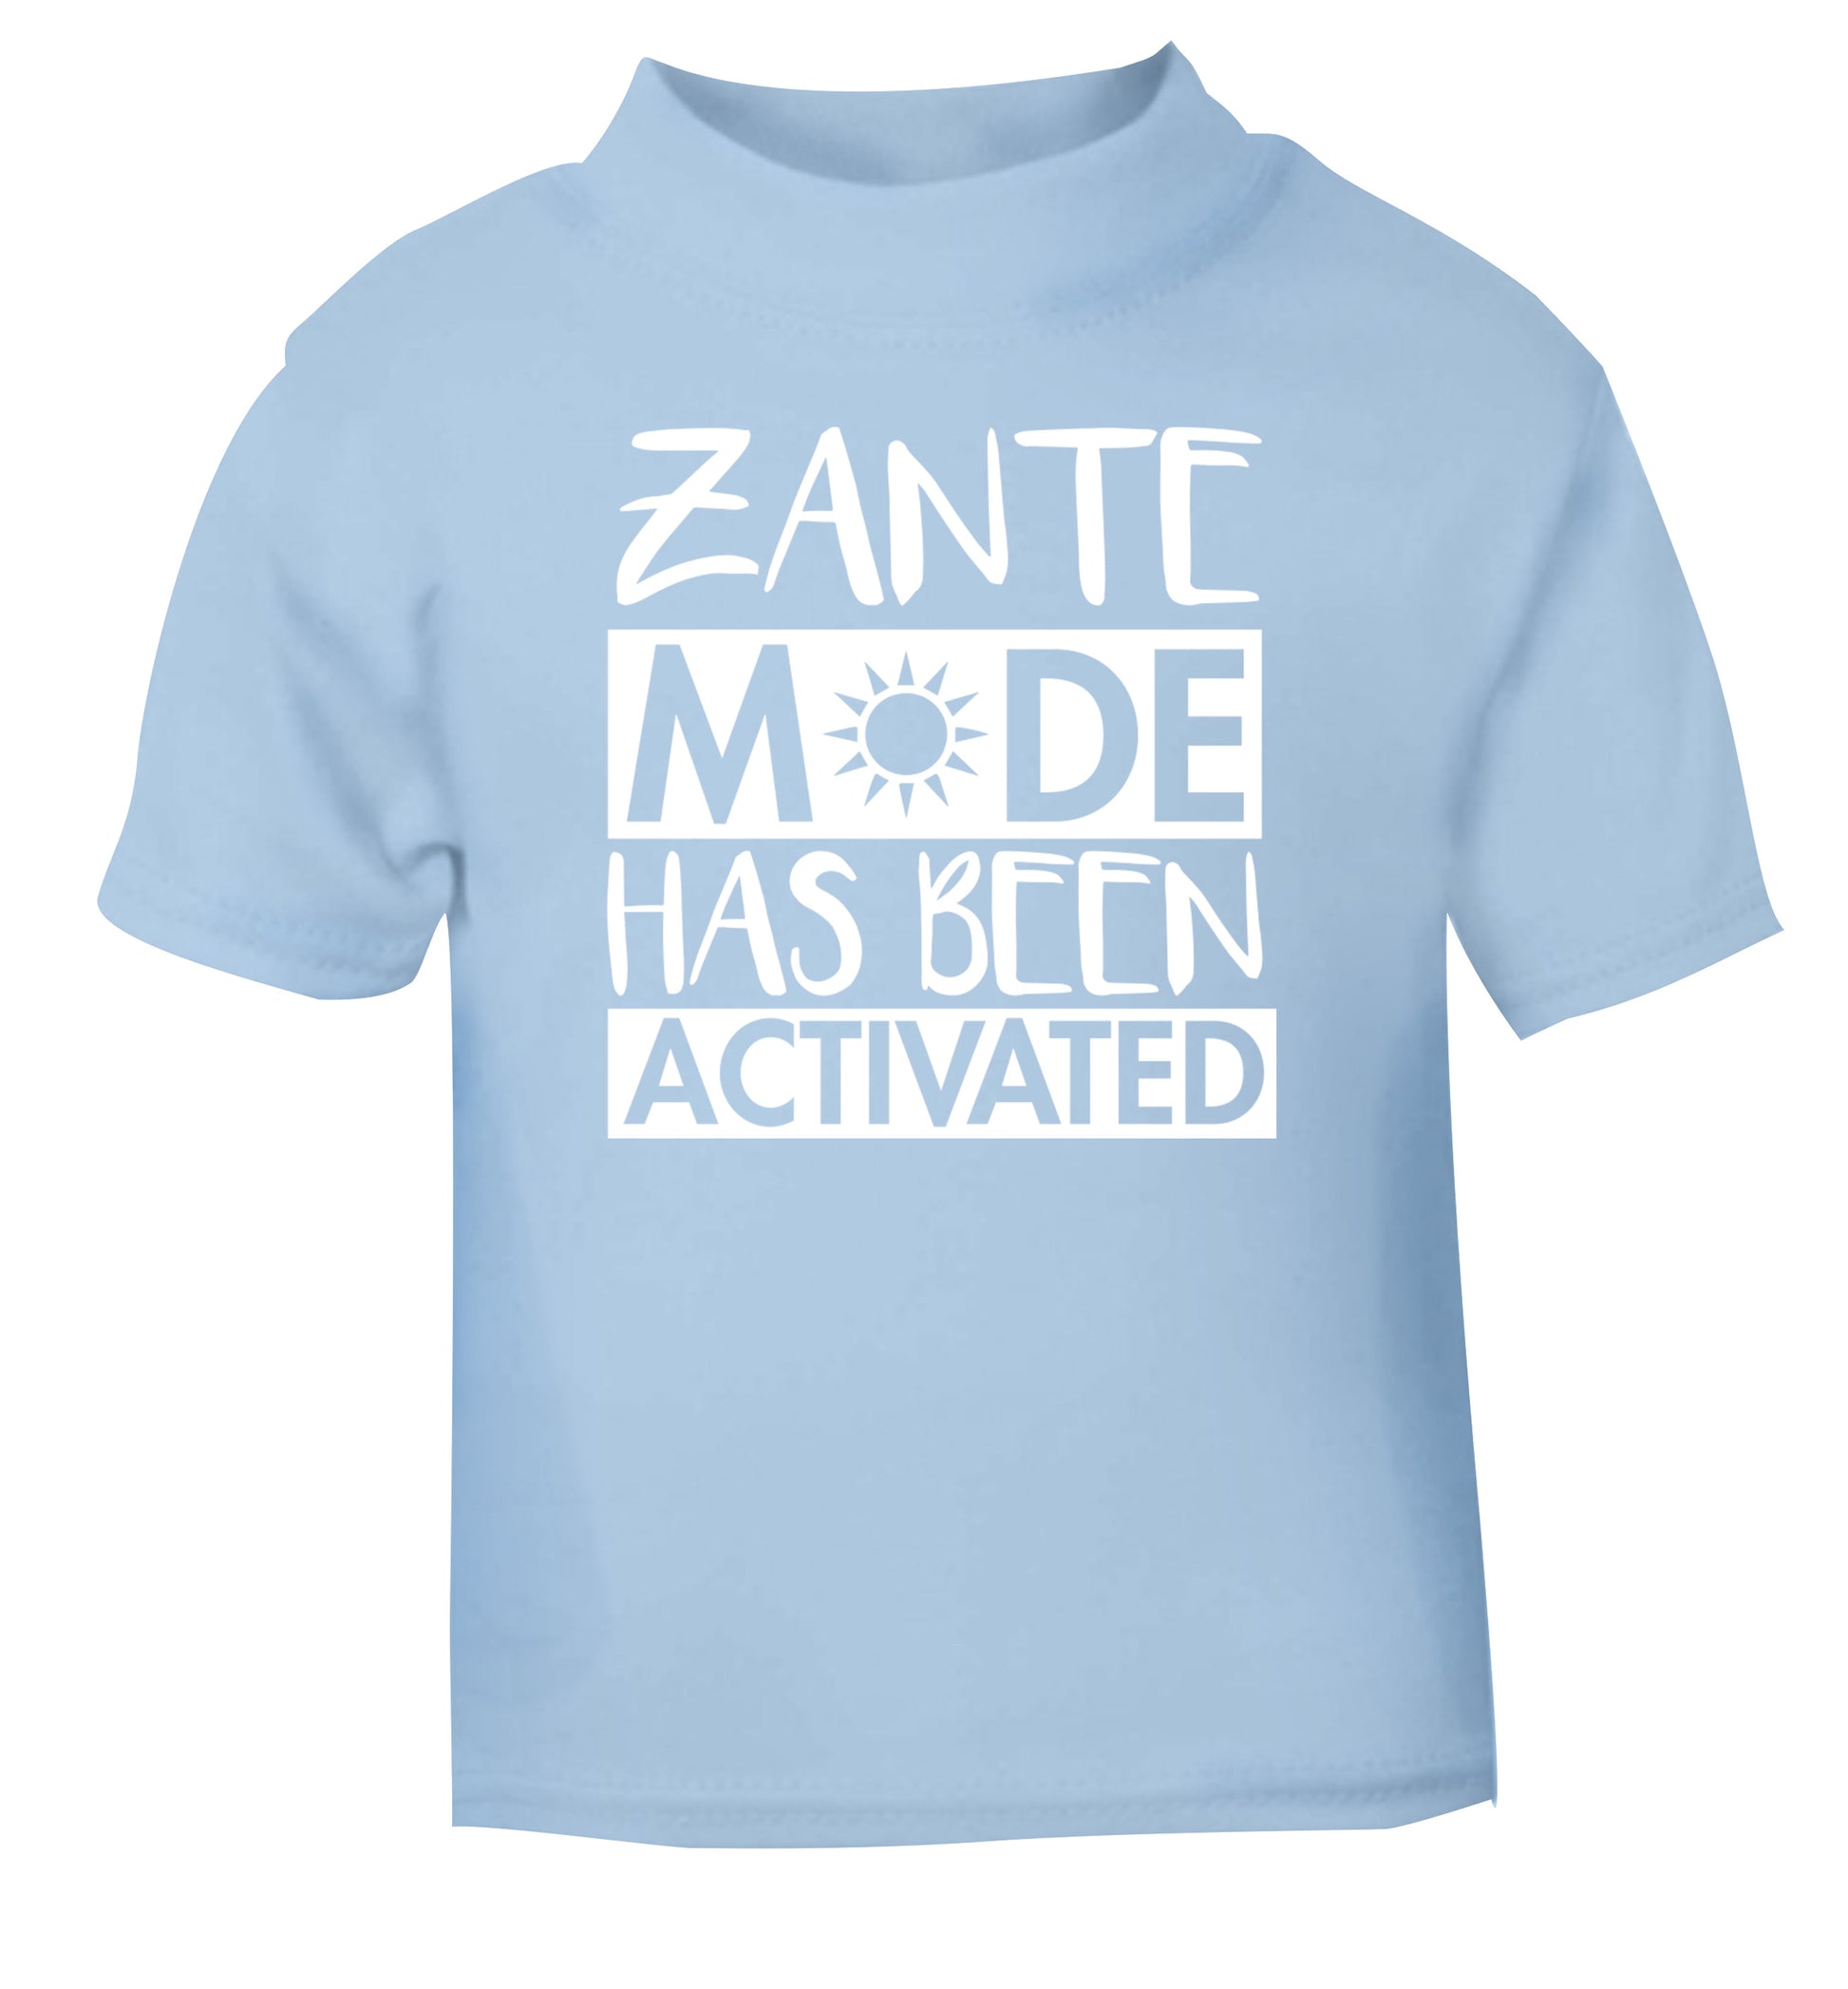 Zante mode has been activated light blue Baby Toddler Tshirt 2 Years